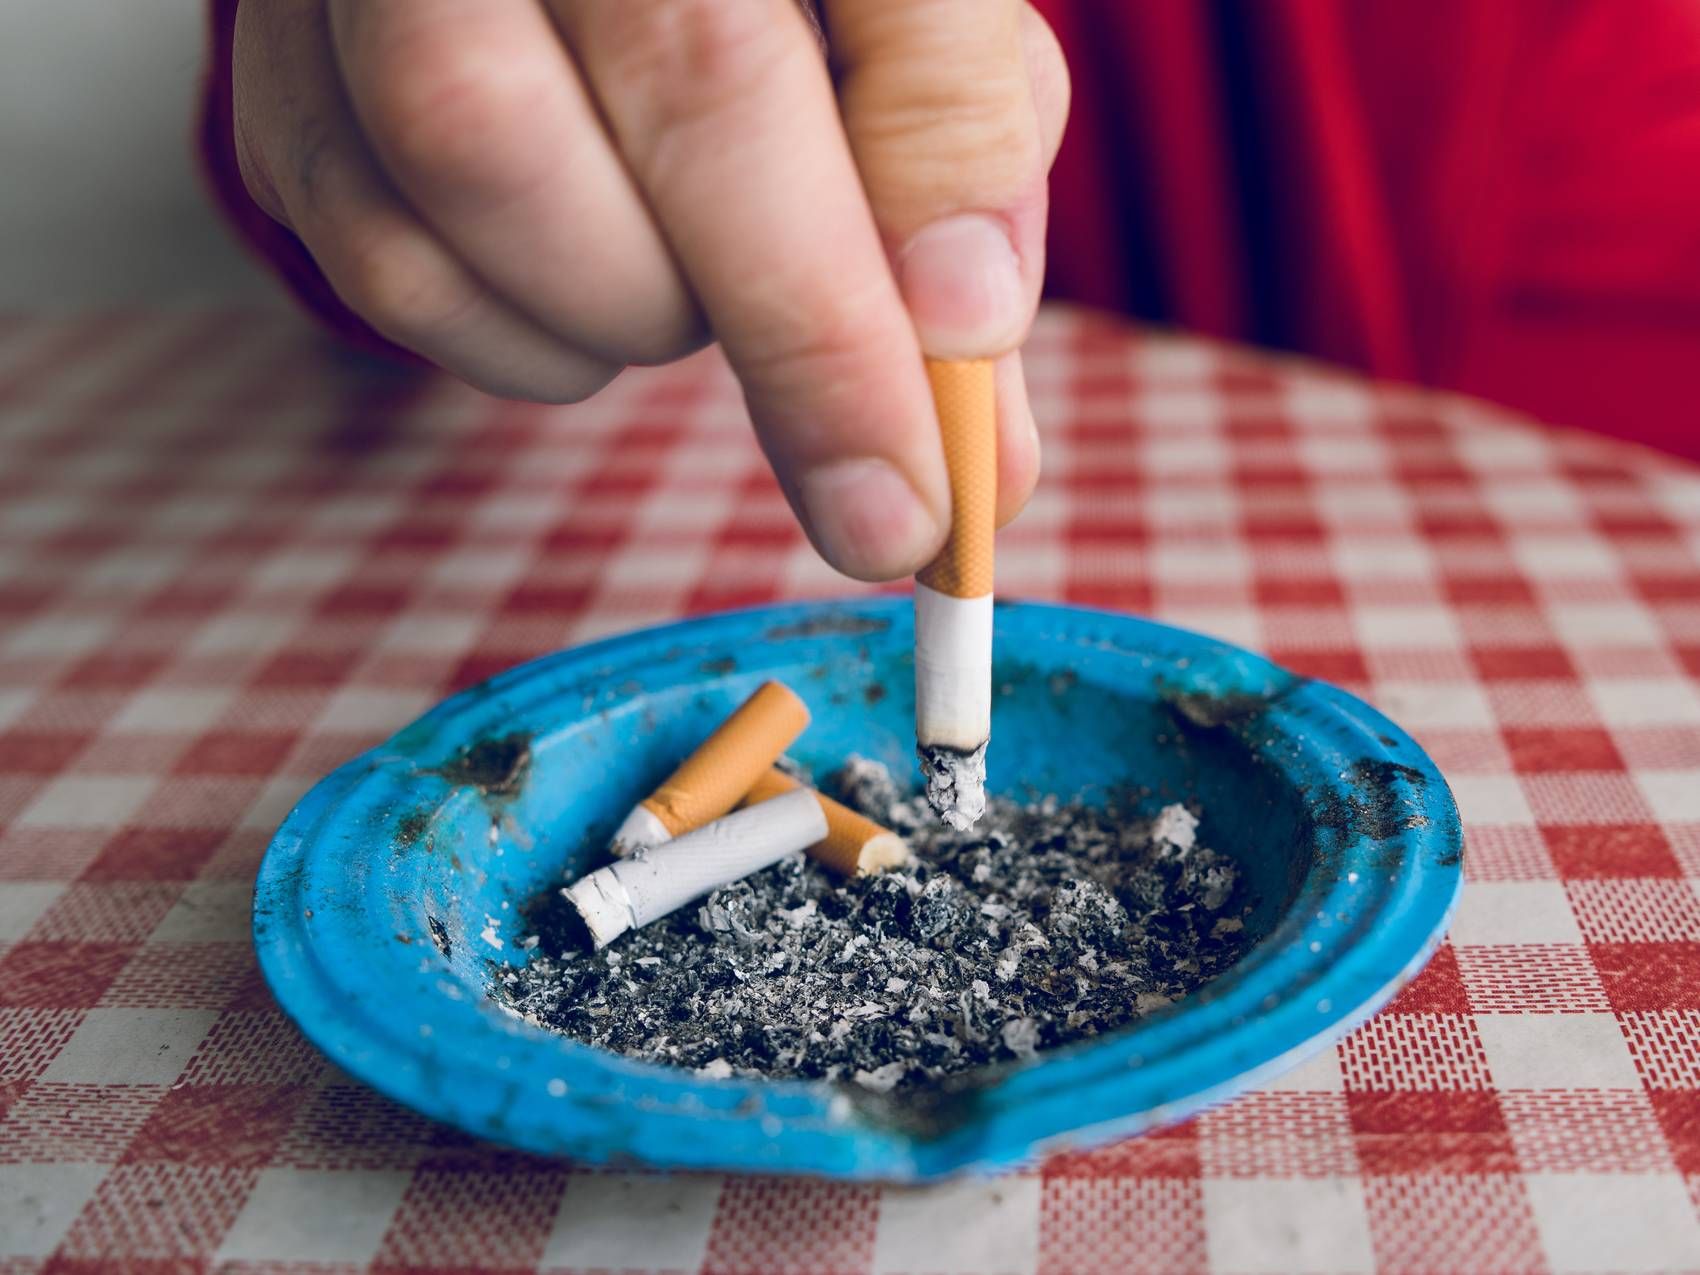 The new results suggest  patients with lung cancer who smoke should be encouraged to stop smoking at any time.